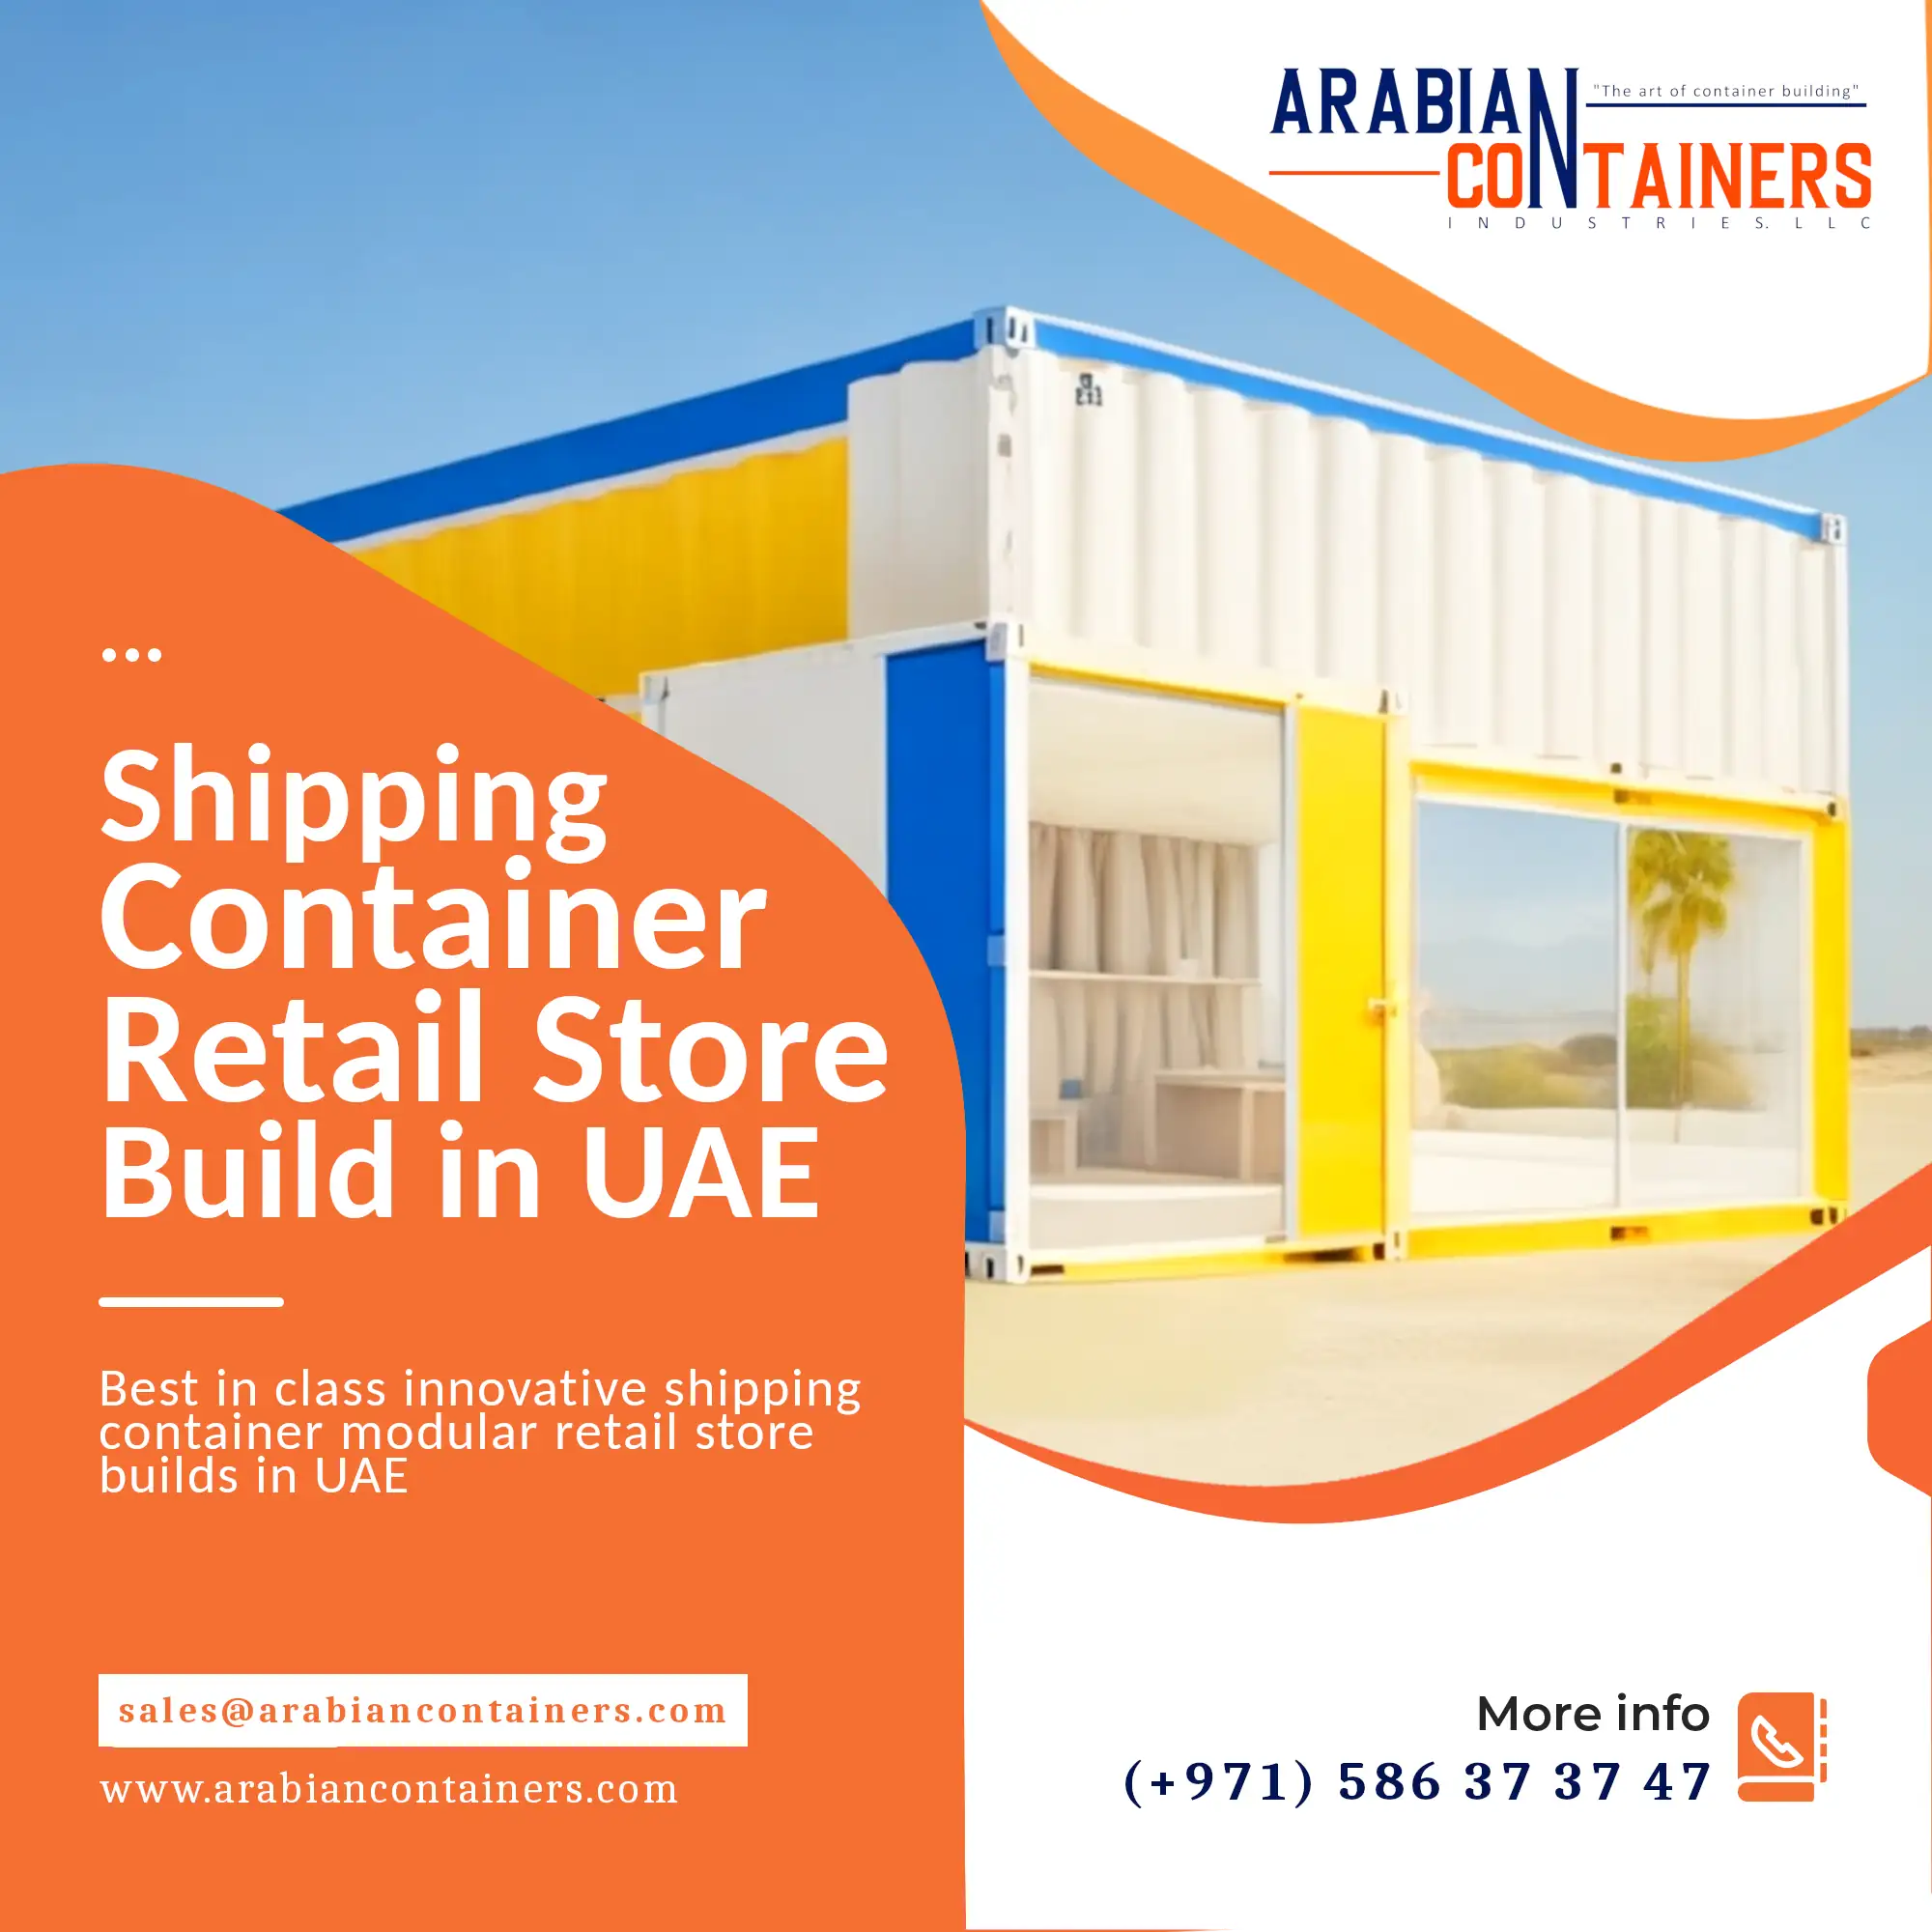 Shipping container retail store builder in UAE.